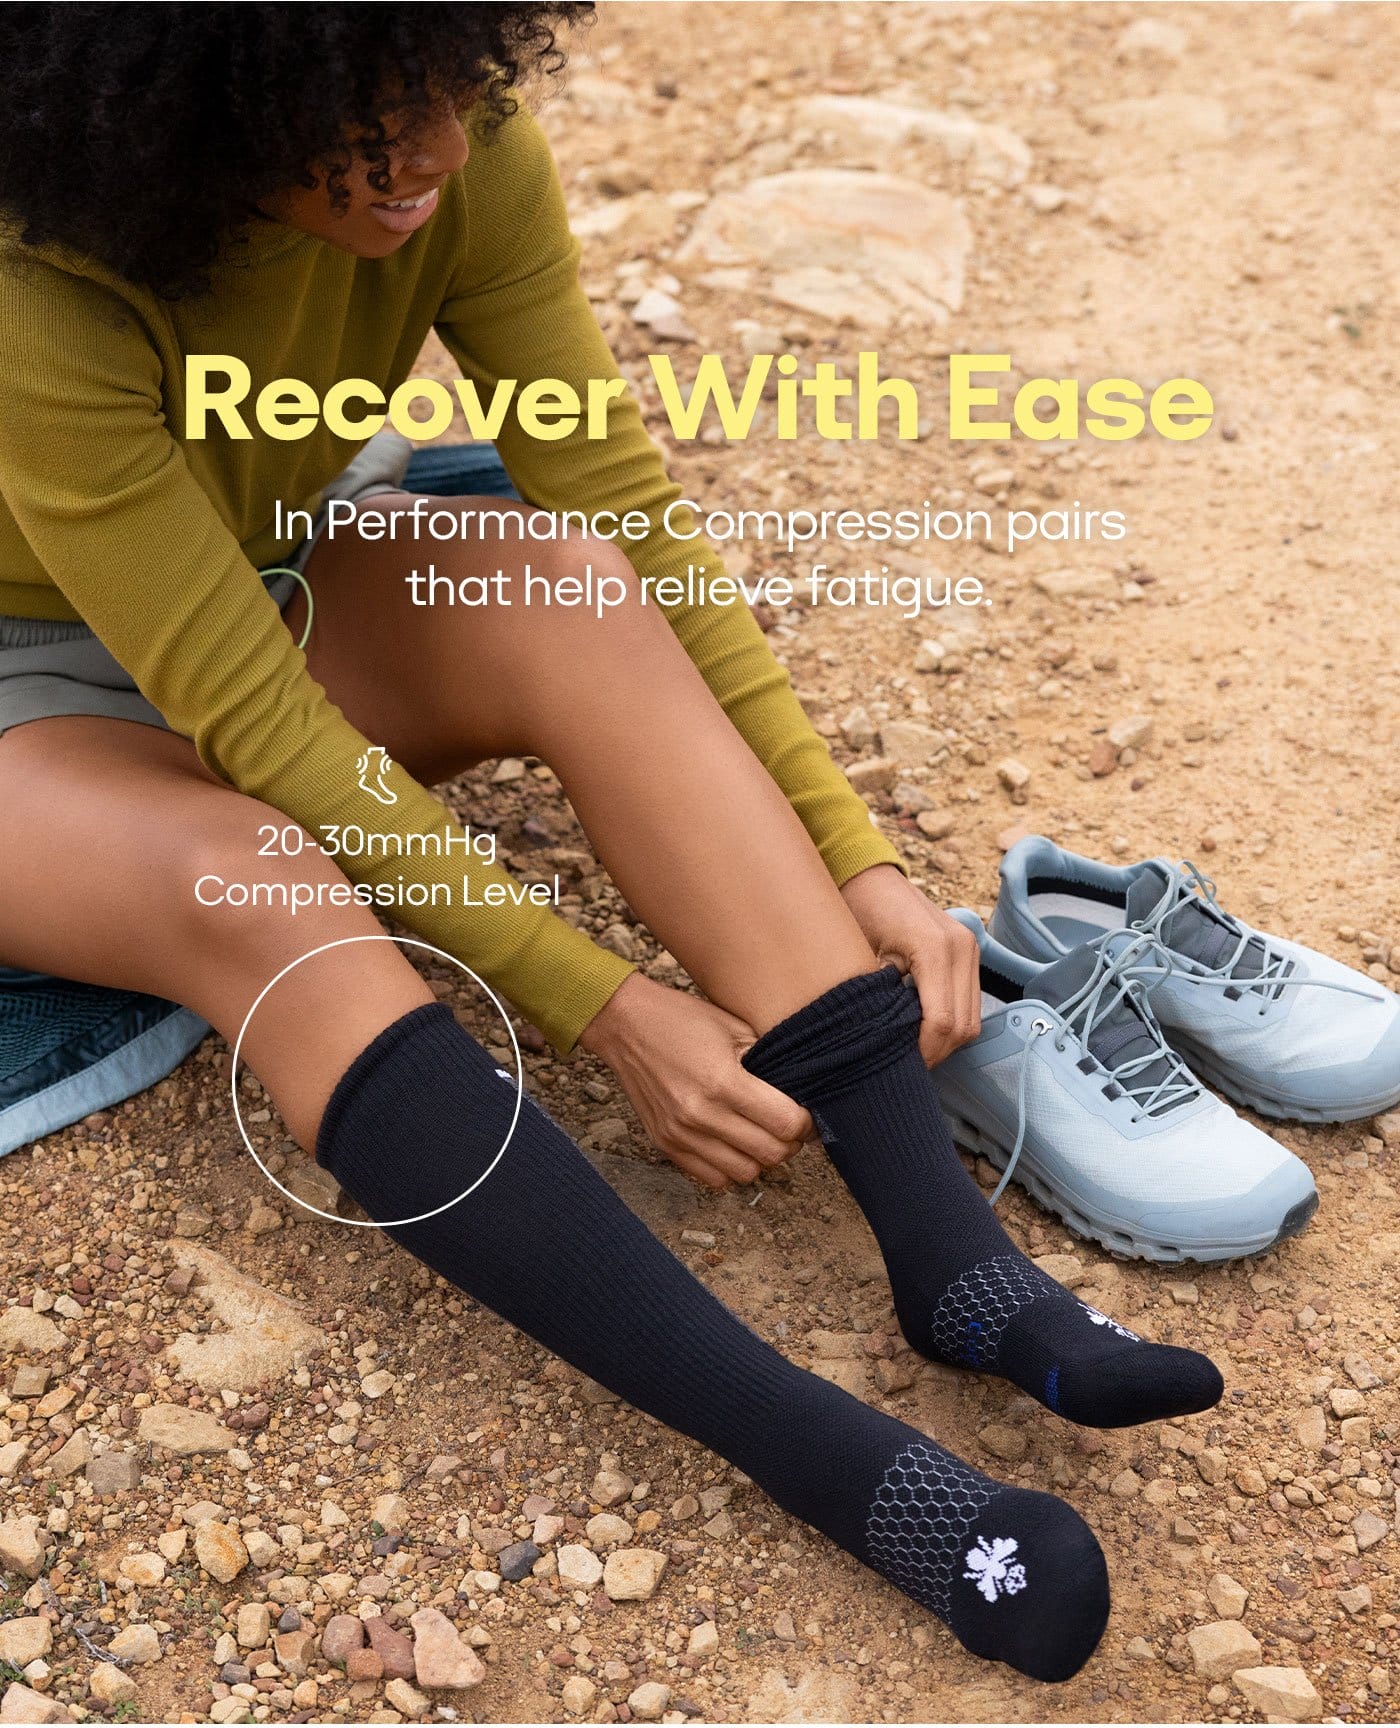 Recover With Ease | In Performance Compression pairs that help relieve fatigue.